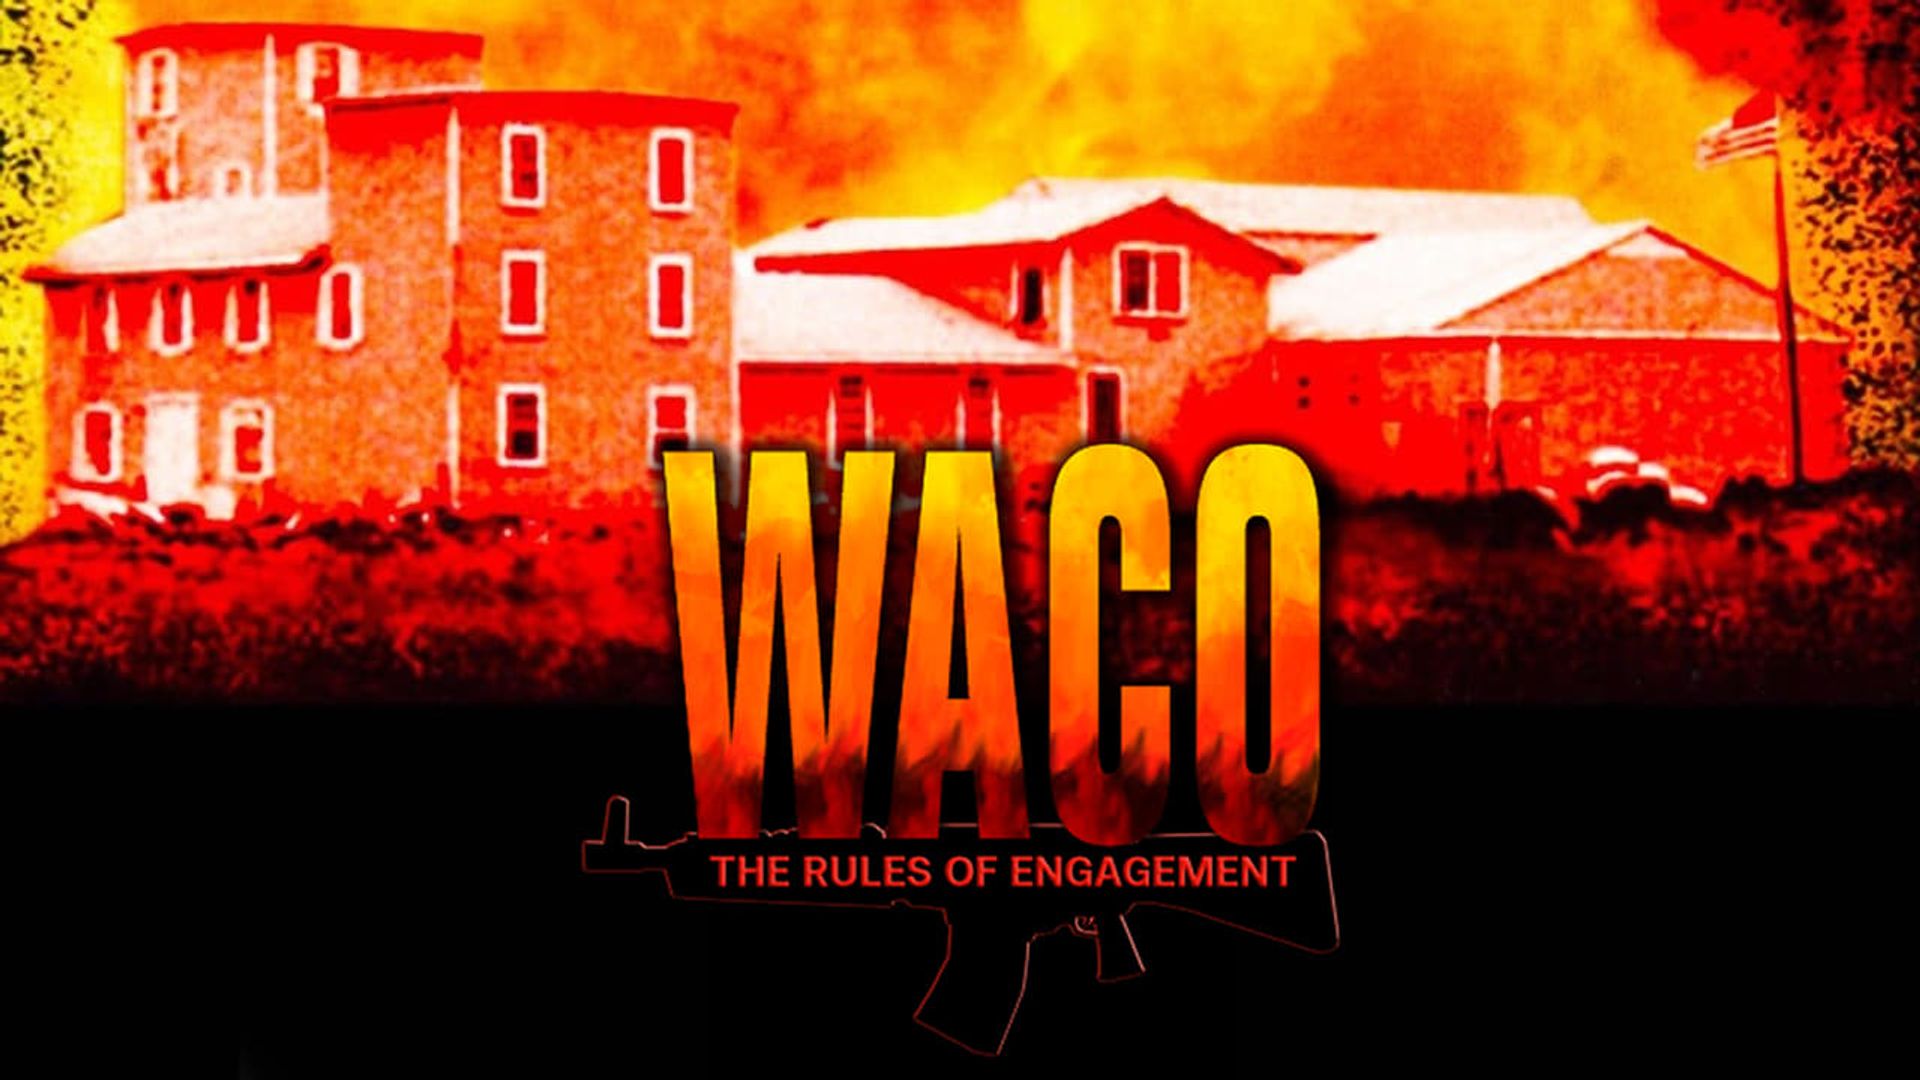 Waco: The Rules of Engagement background